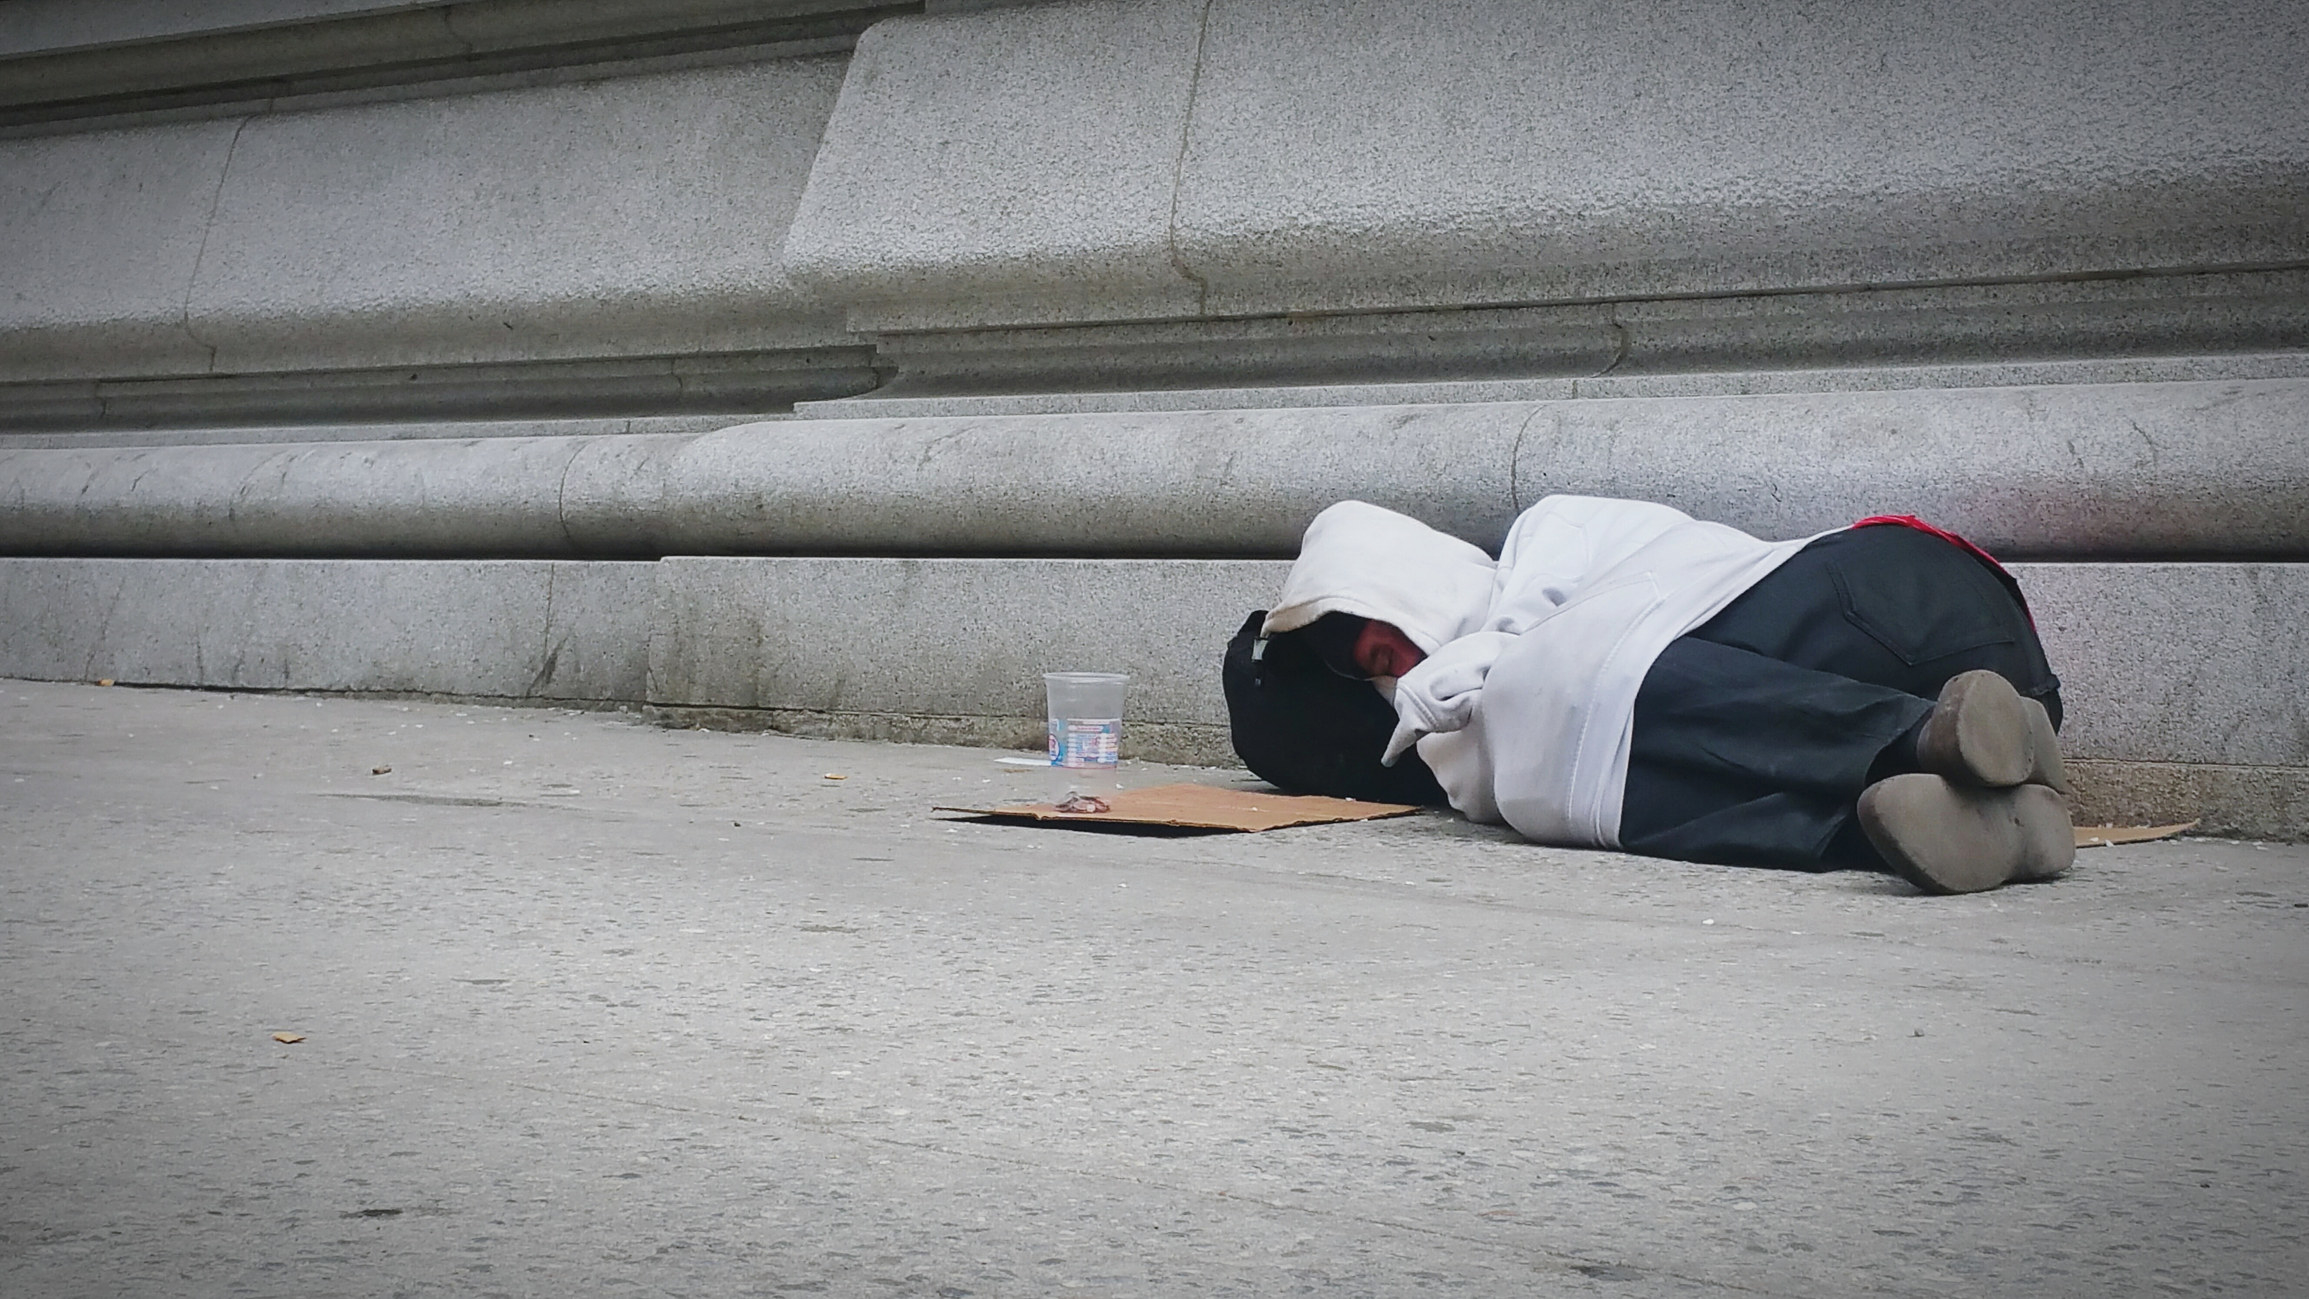 someone sleeps outside on the street with cardboard and a cup next to them